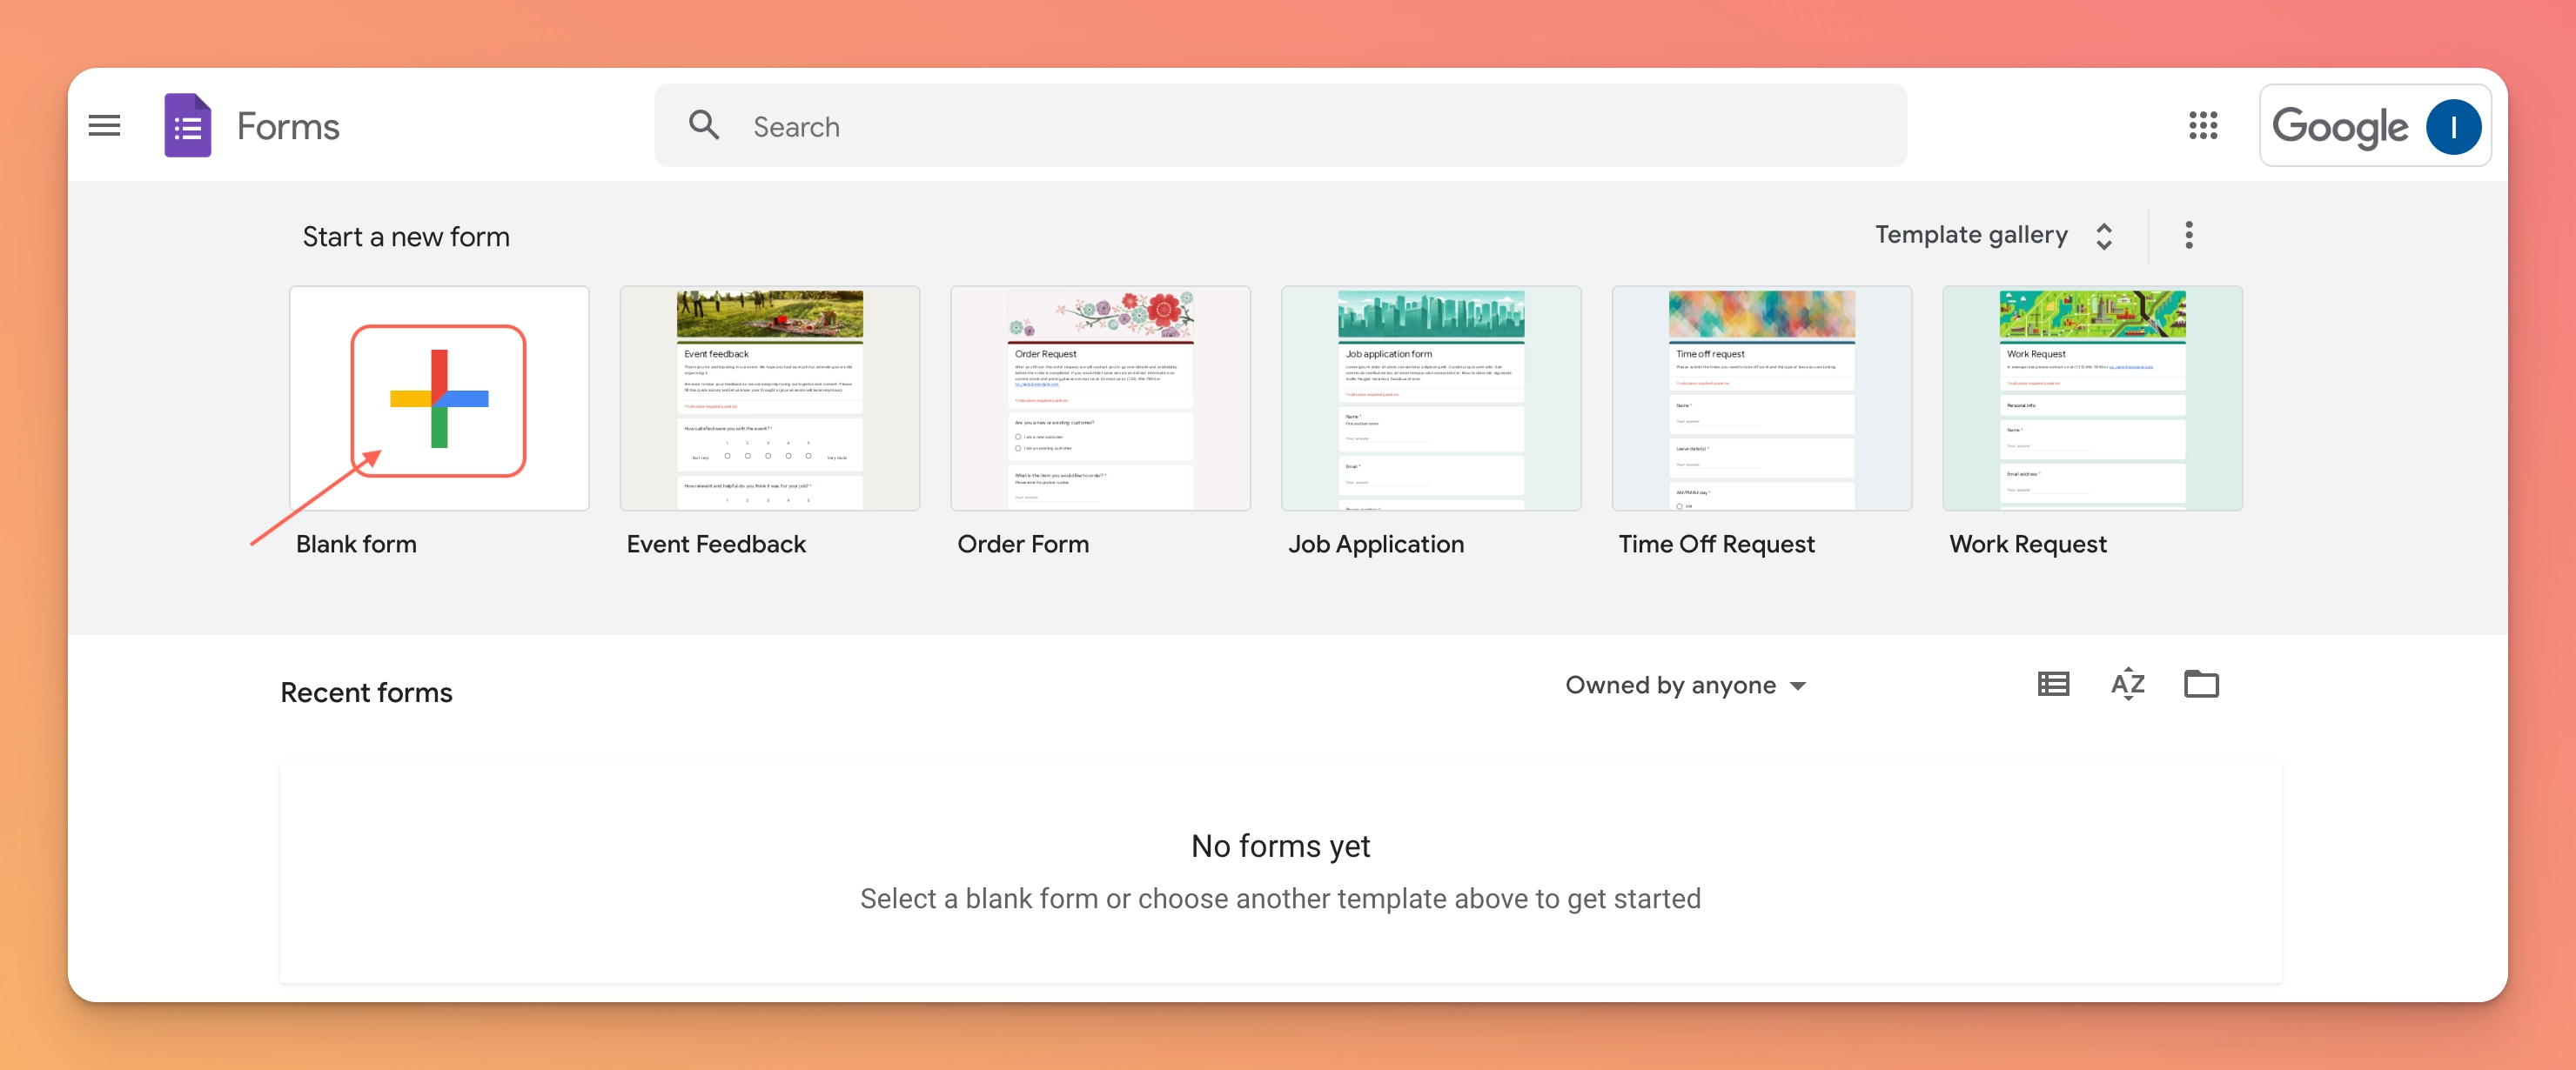 Start from a blank form or try using a template - How to Add Google Forms to Your Blog